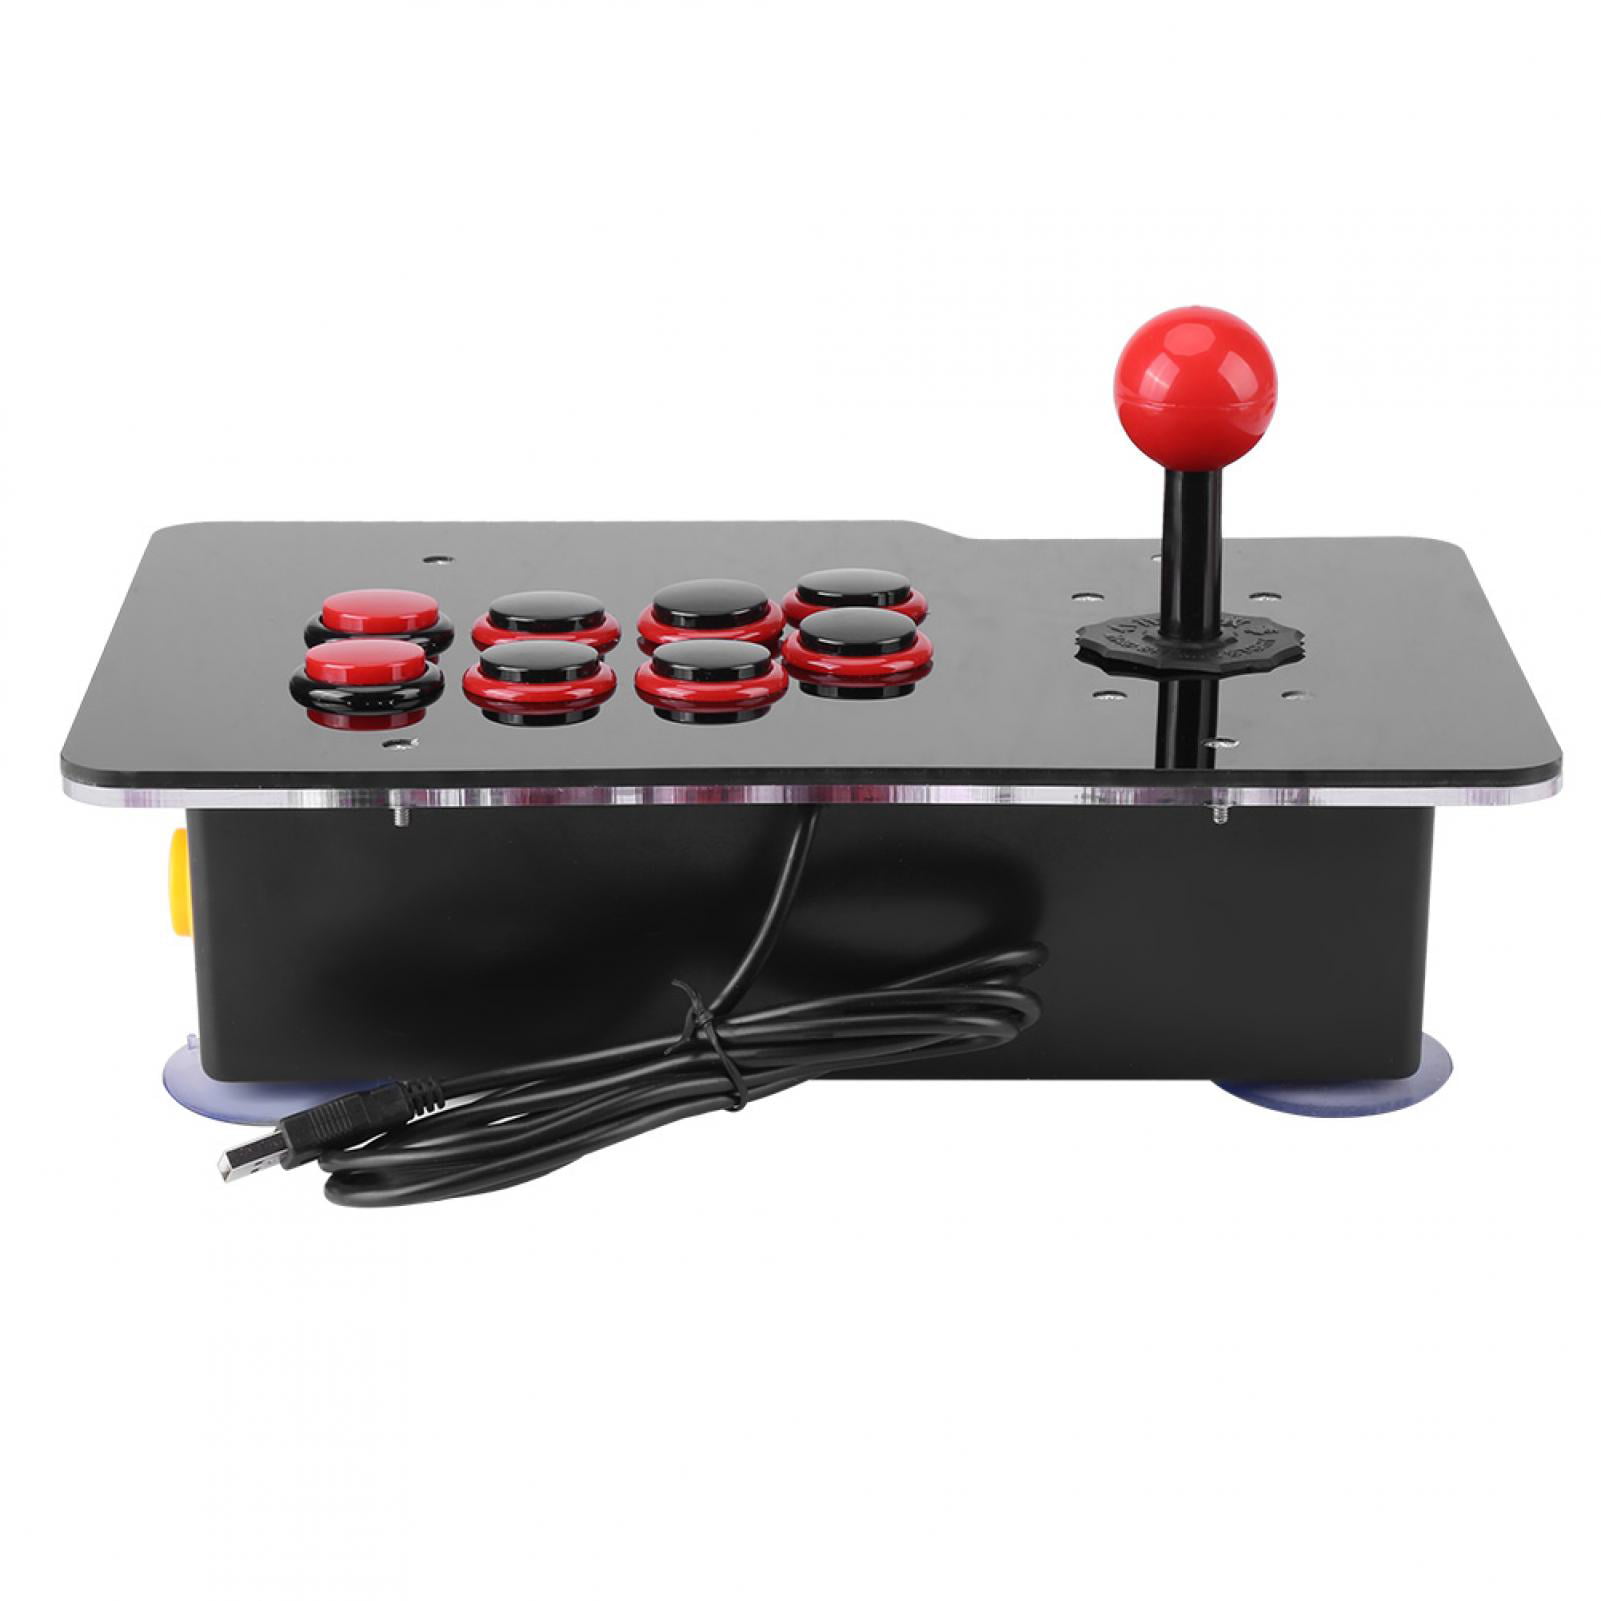 Cewaal Zero Delay USB Arcade Game Video Game 8 Directions Stick Joystick Controller For PC Android